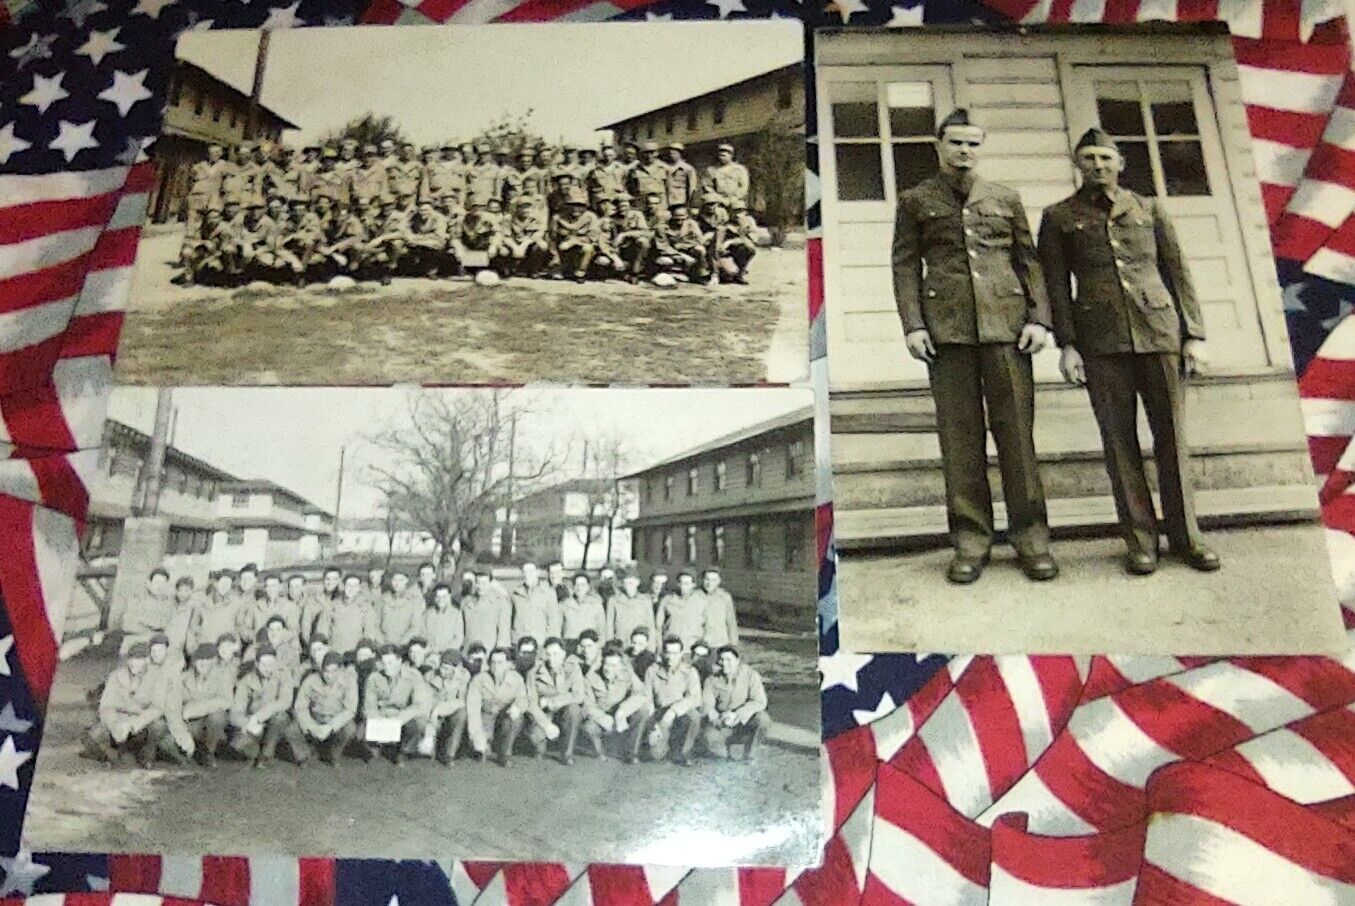 RPPC PHOTOGRAPH POSTCARD COLLECTION.  WWII U.S. SOLDIERS AND UNITS IDENTIFIED.